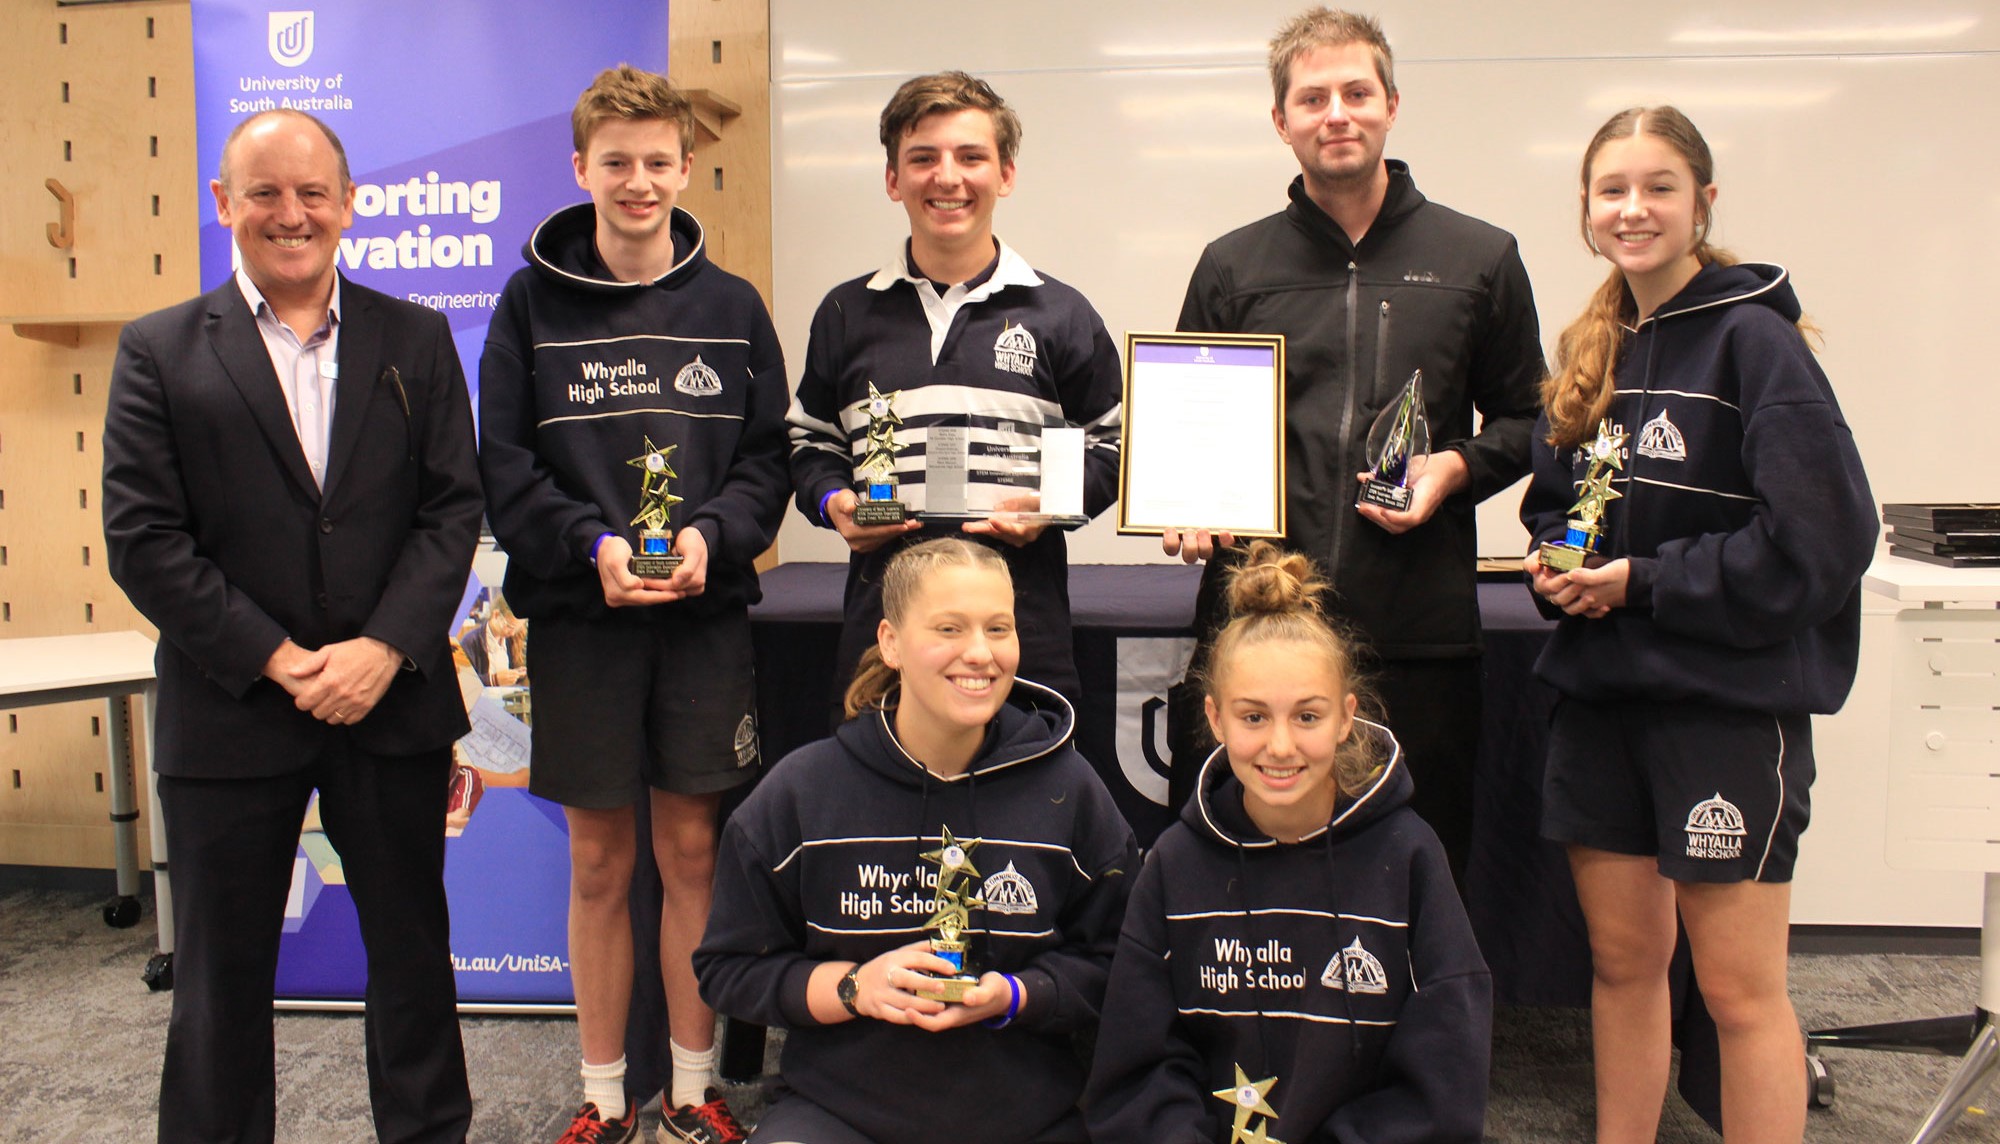 The winning team of 6 students and their teacher from Whyalla High School receiving their award. 